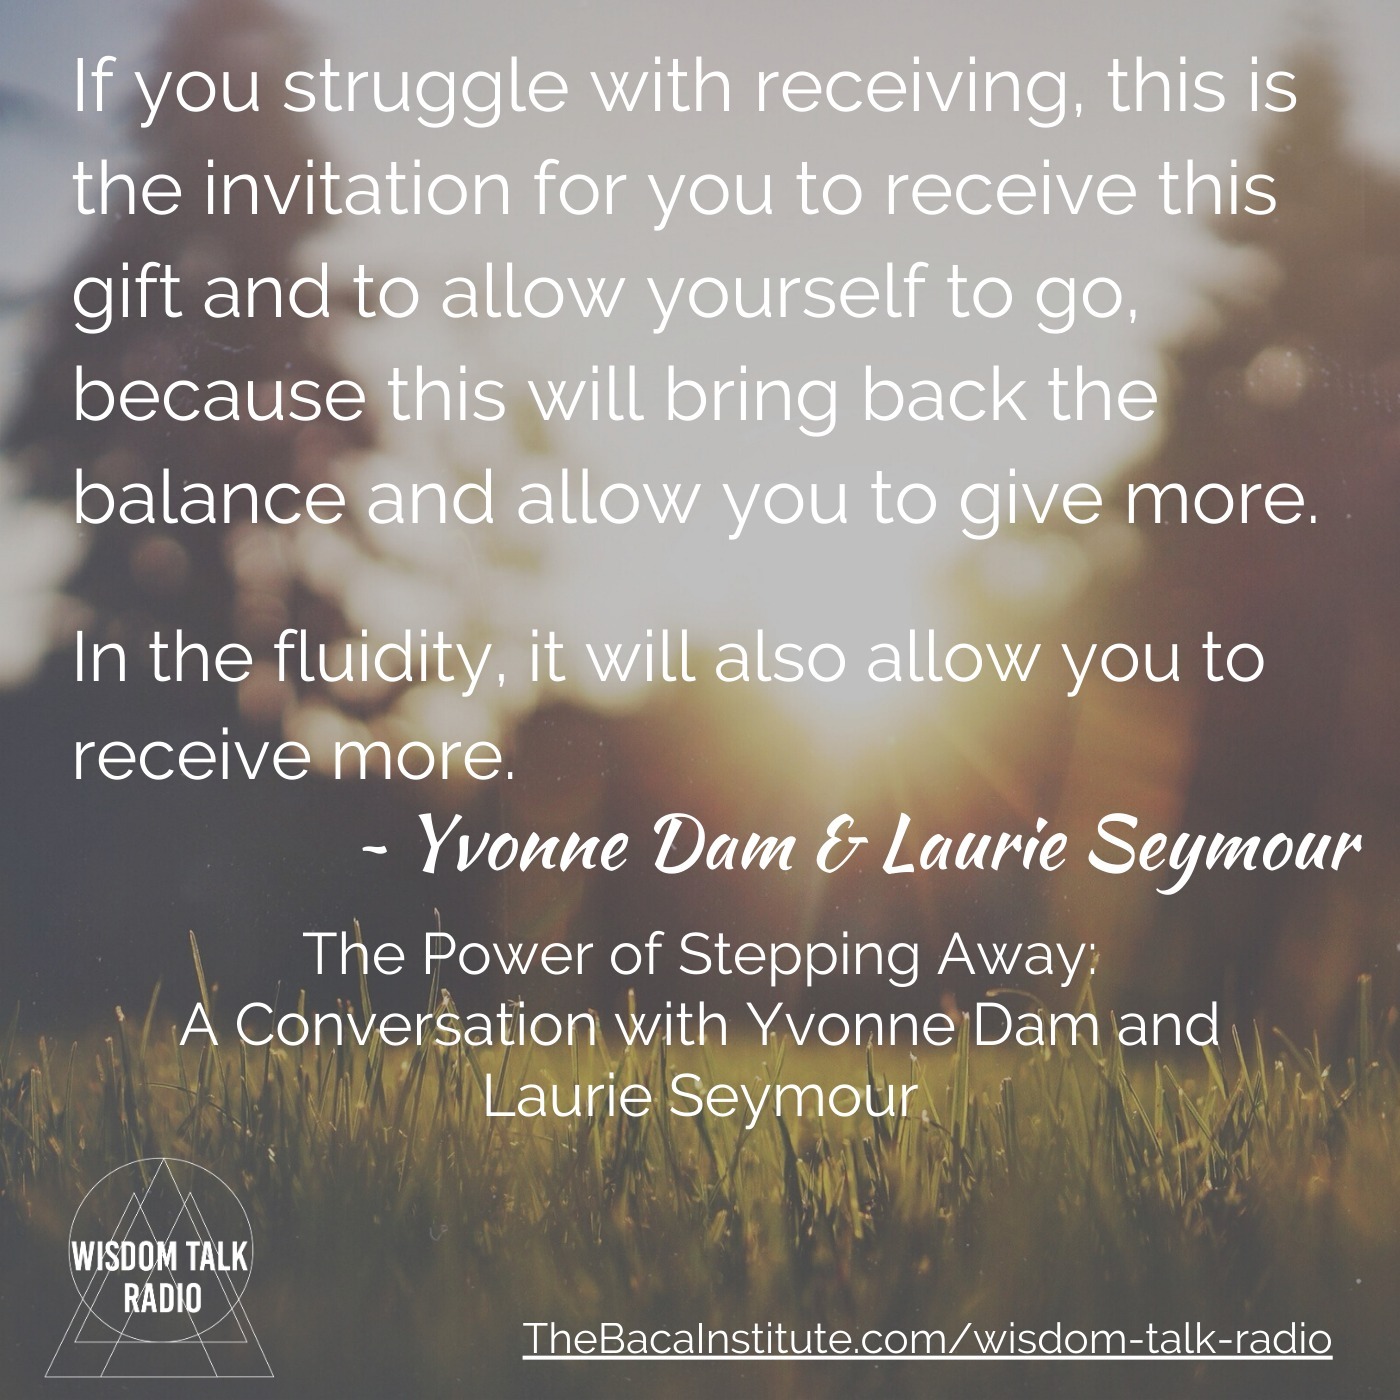 The Power of Stepping Away: a Conversation with Yvonne Dam and Laurie Seymour